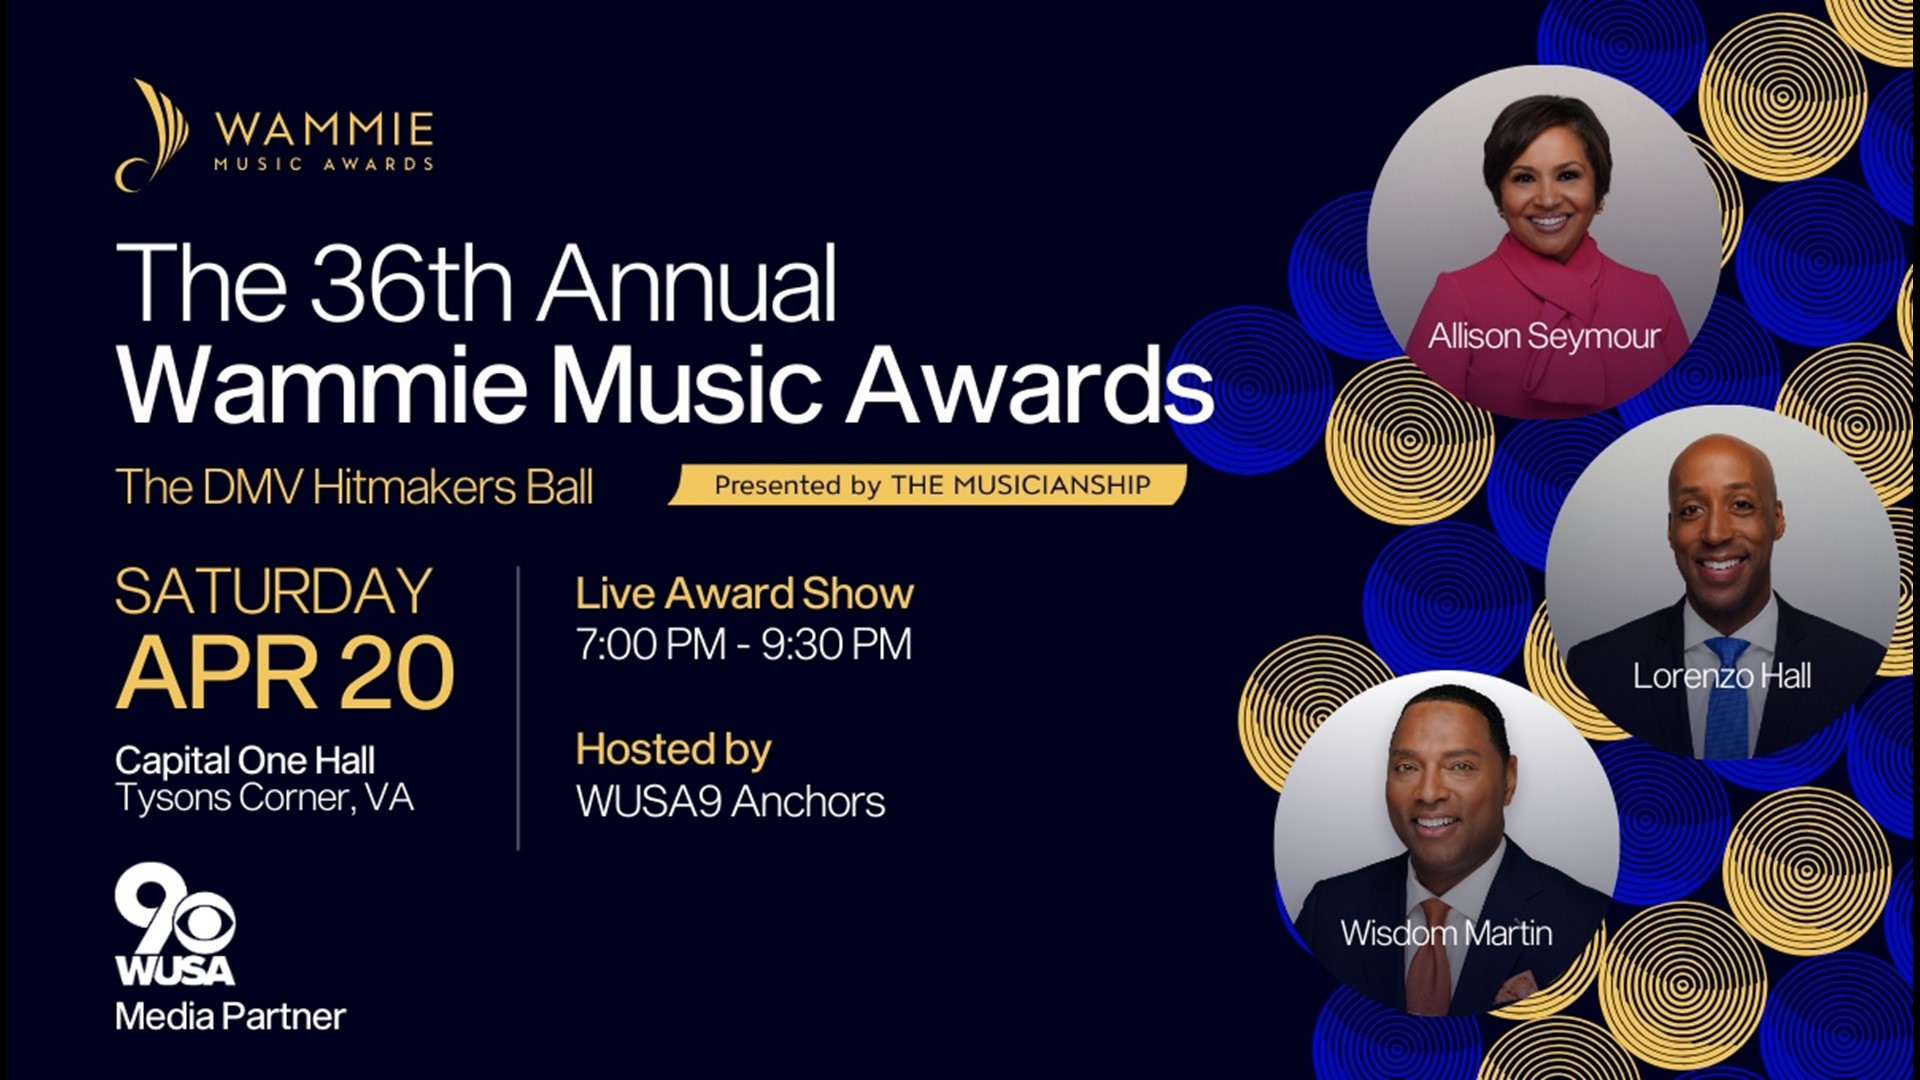 The 36th annual Wammie music awards take place Saturday, April 20th at Capital One Hall in Tysons, Virginia! Buy your tickets at wammie.org.